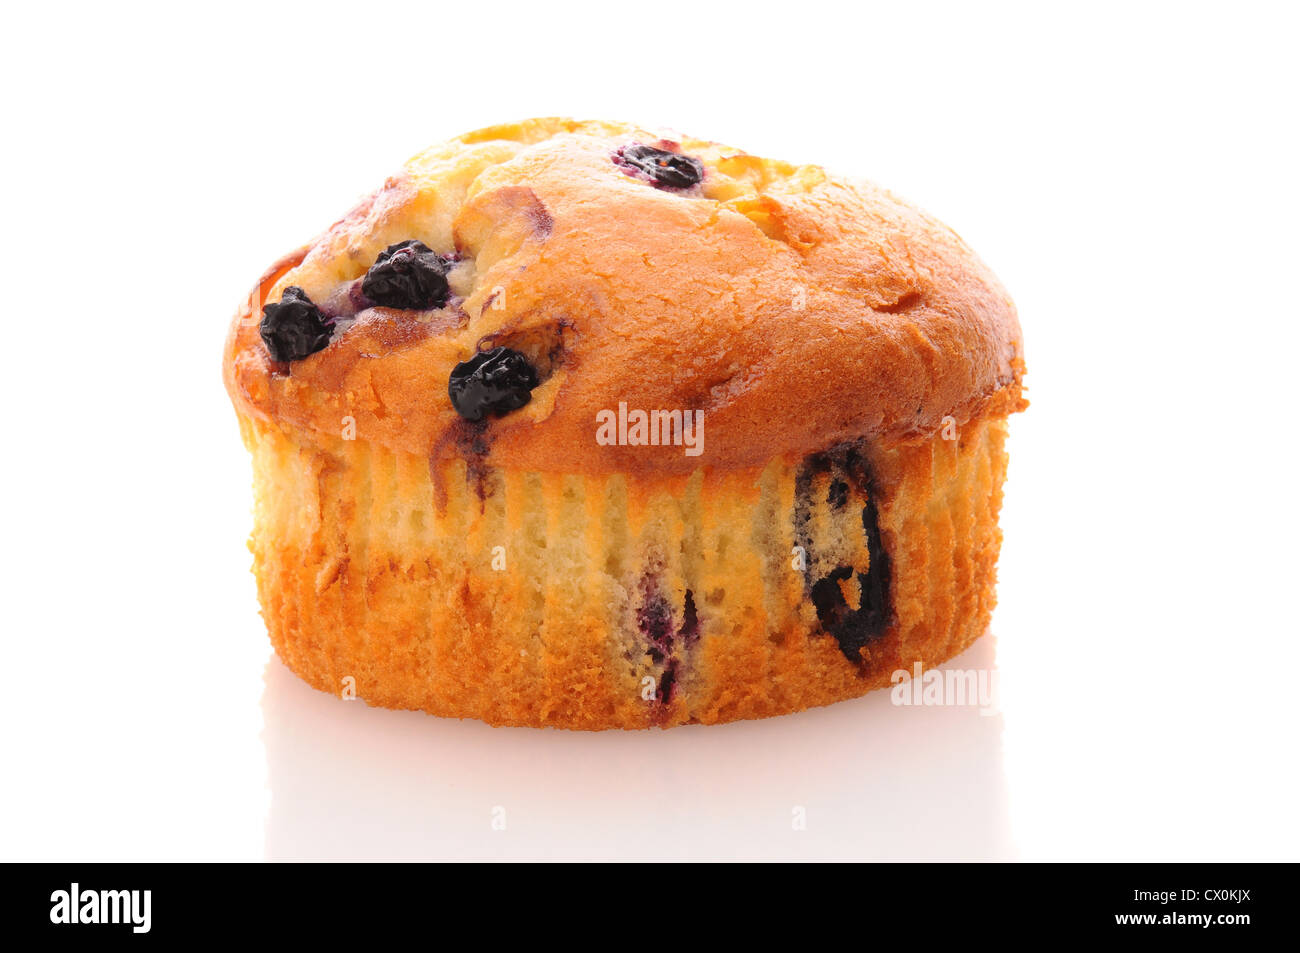 Closeup of a Blueberry Muffin on a white surface with reflection. Stock Photo